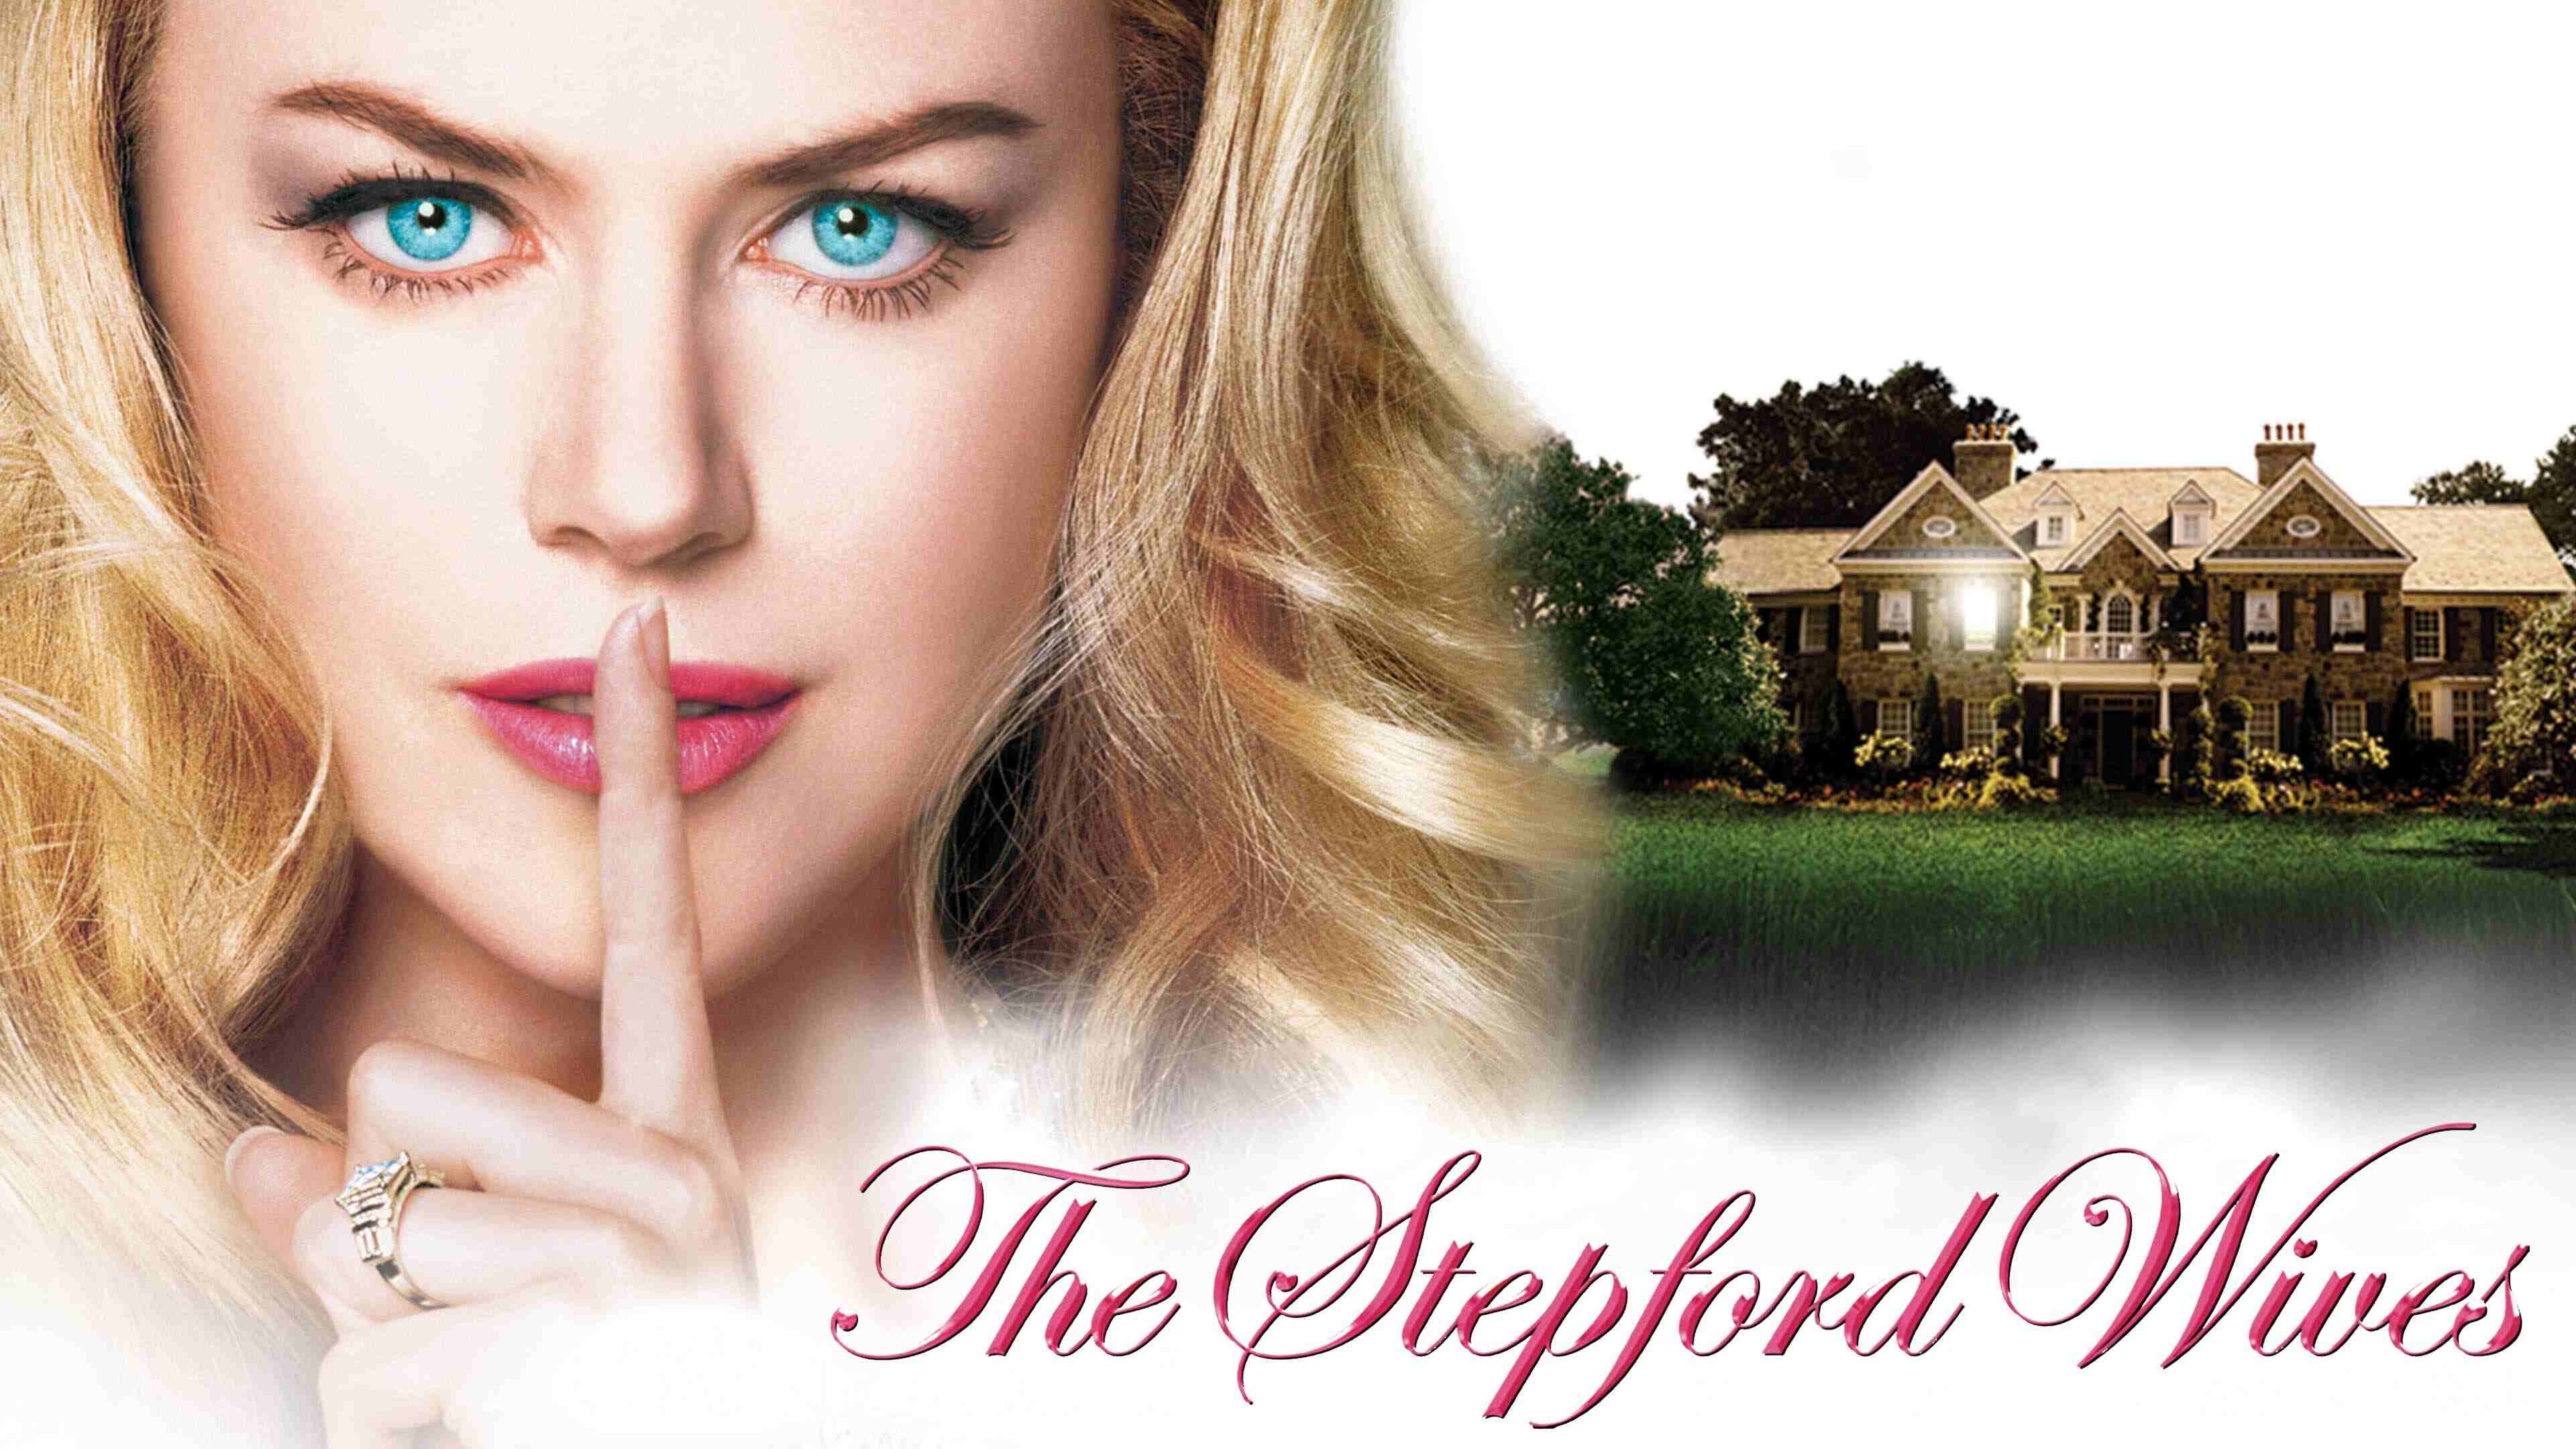 44-facts-about-the-movie-the-stepford-wives